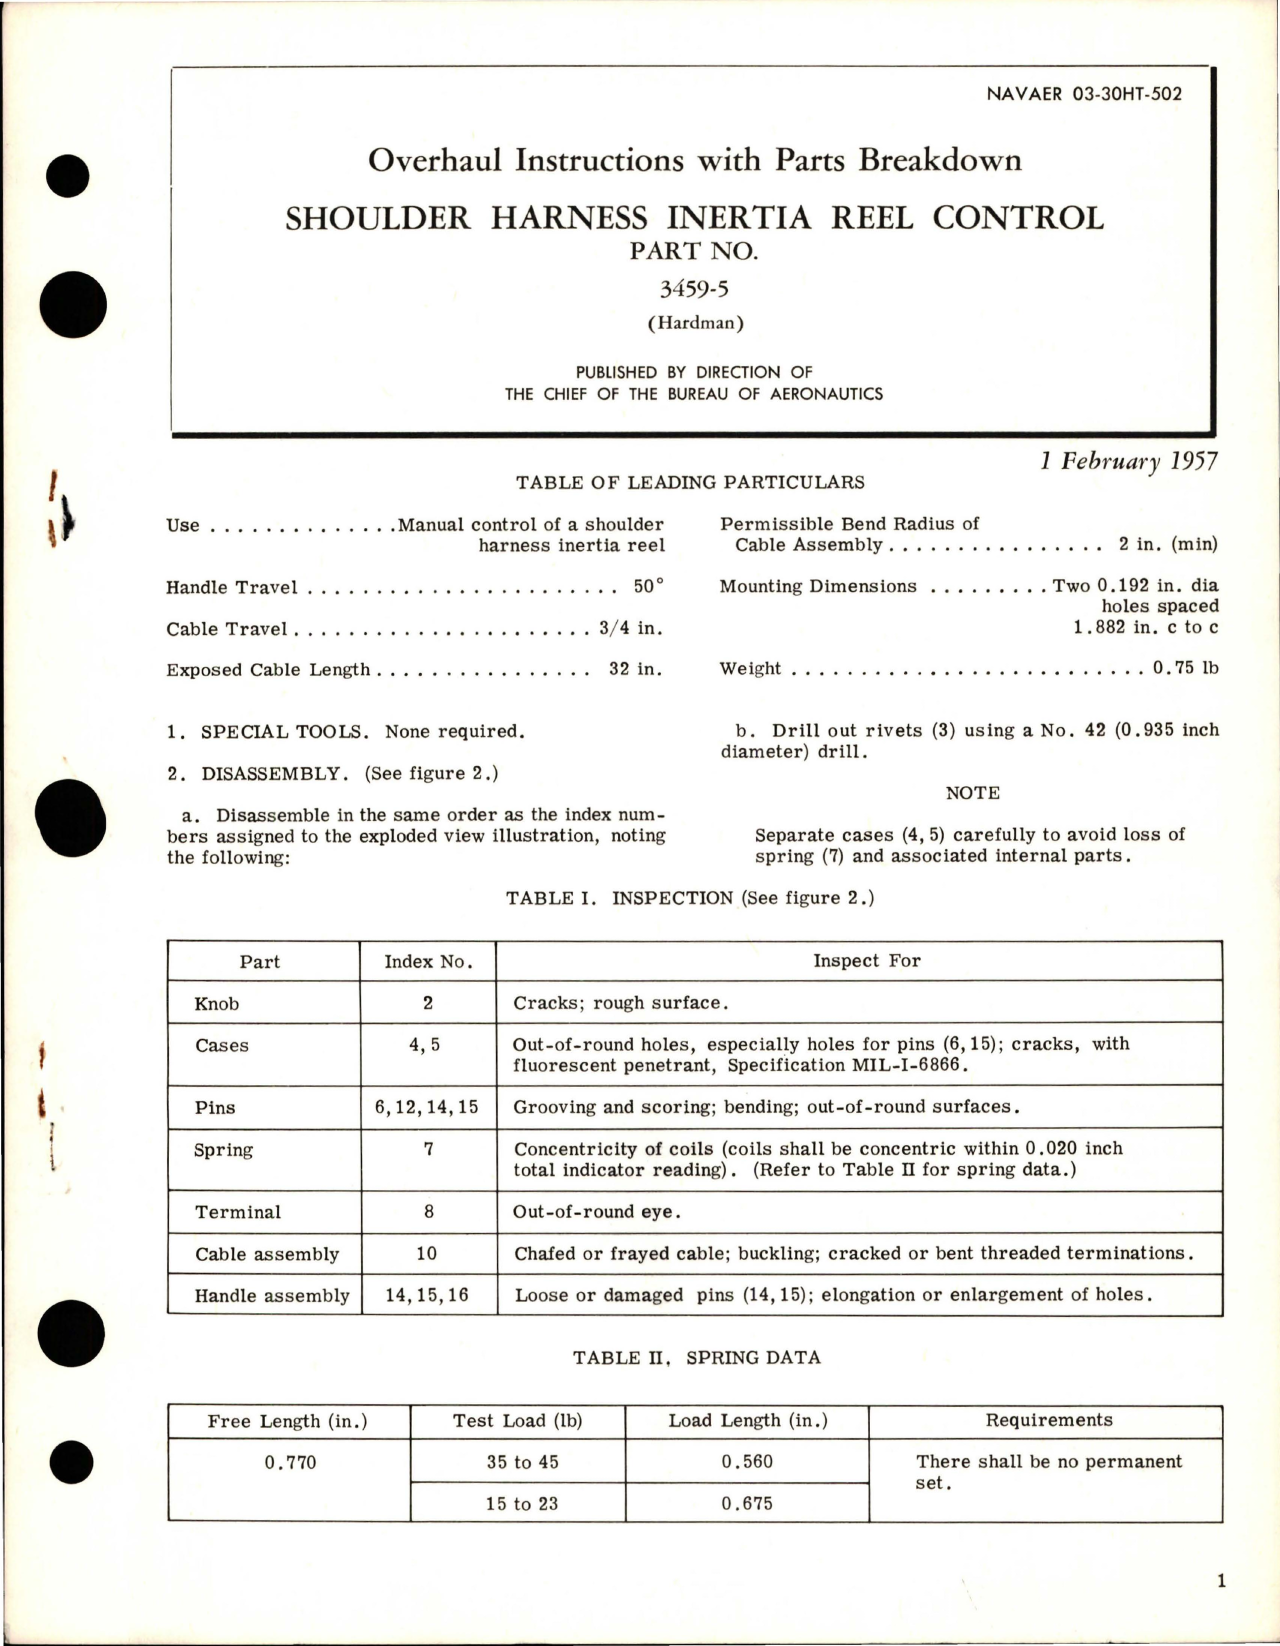 Sample page 1 from AirCorps Library document: Overhaul Instructions with Parts Breakdown for Shoulder Harness Inertia Reel Control - Part 3459-5